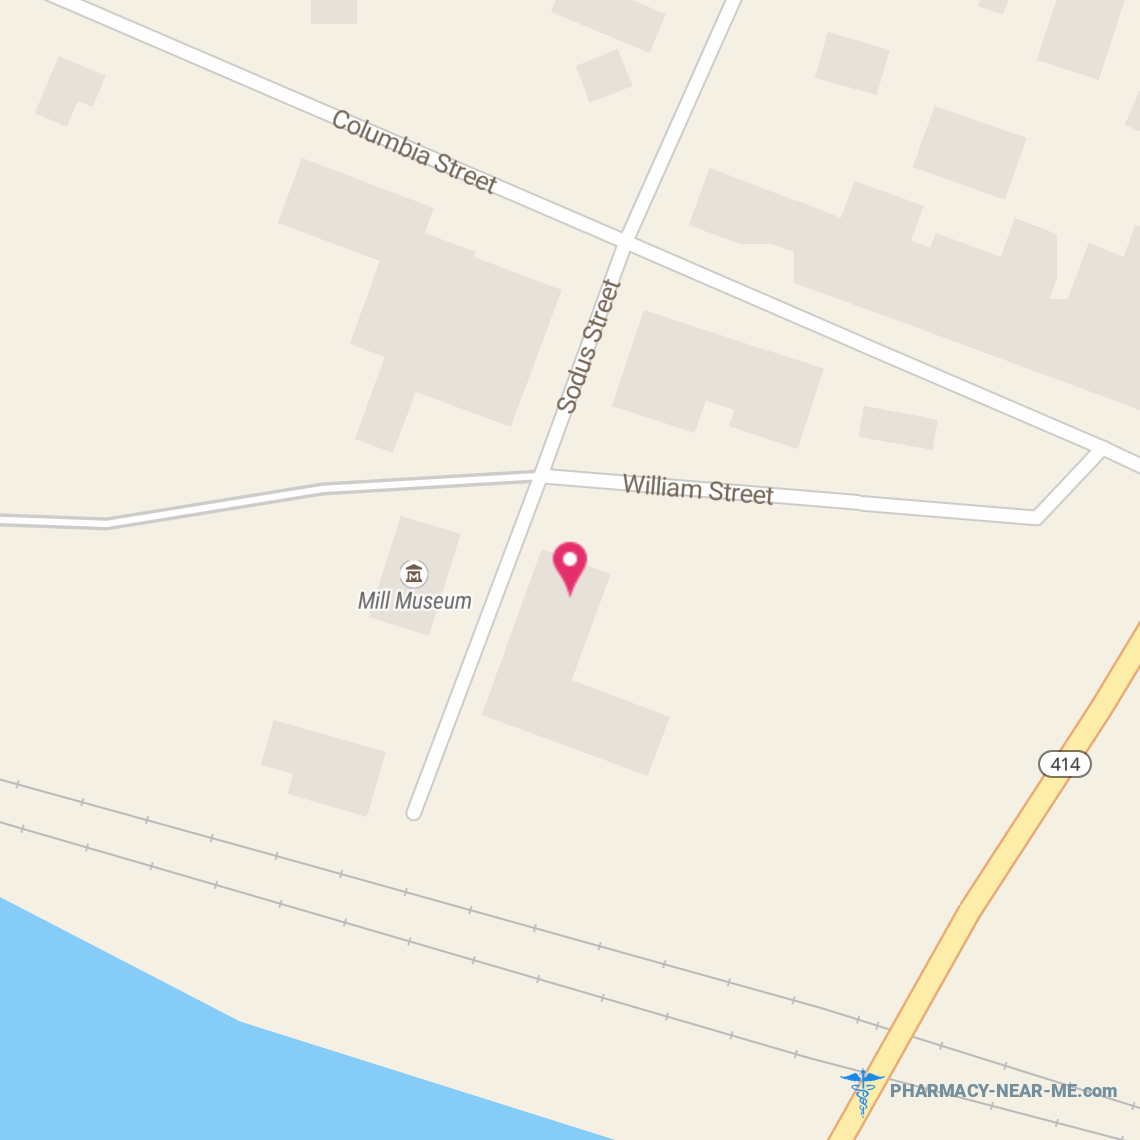 GALENS, INC. - Pharmacy Hours, Phone, Reviews & Information: 17 Sodus Street, Clyde, New York 14433, United States